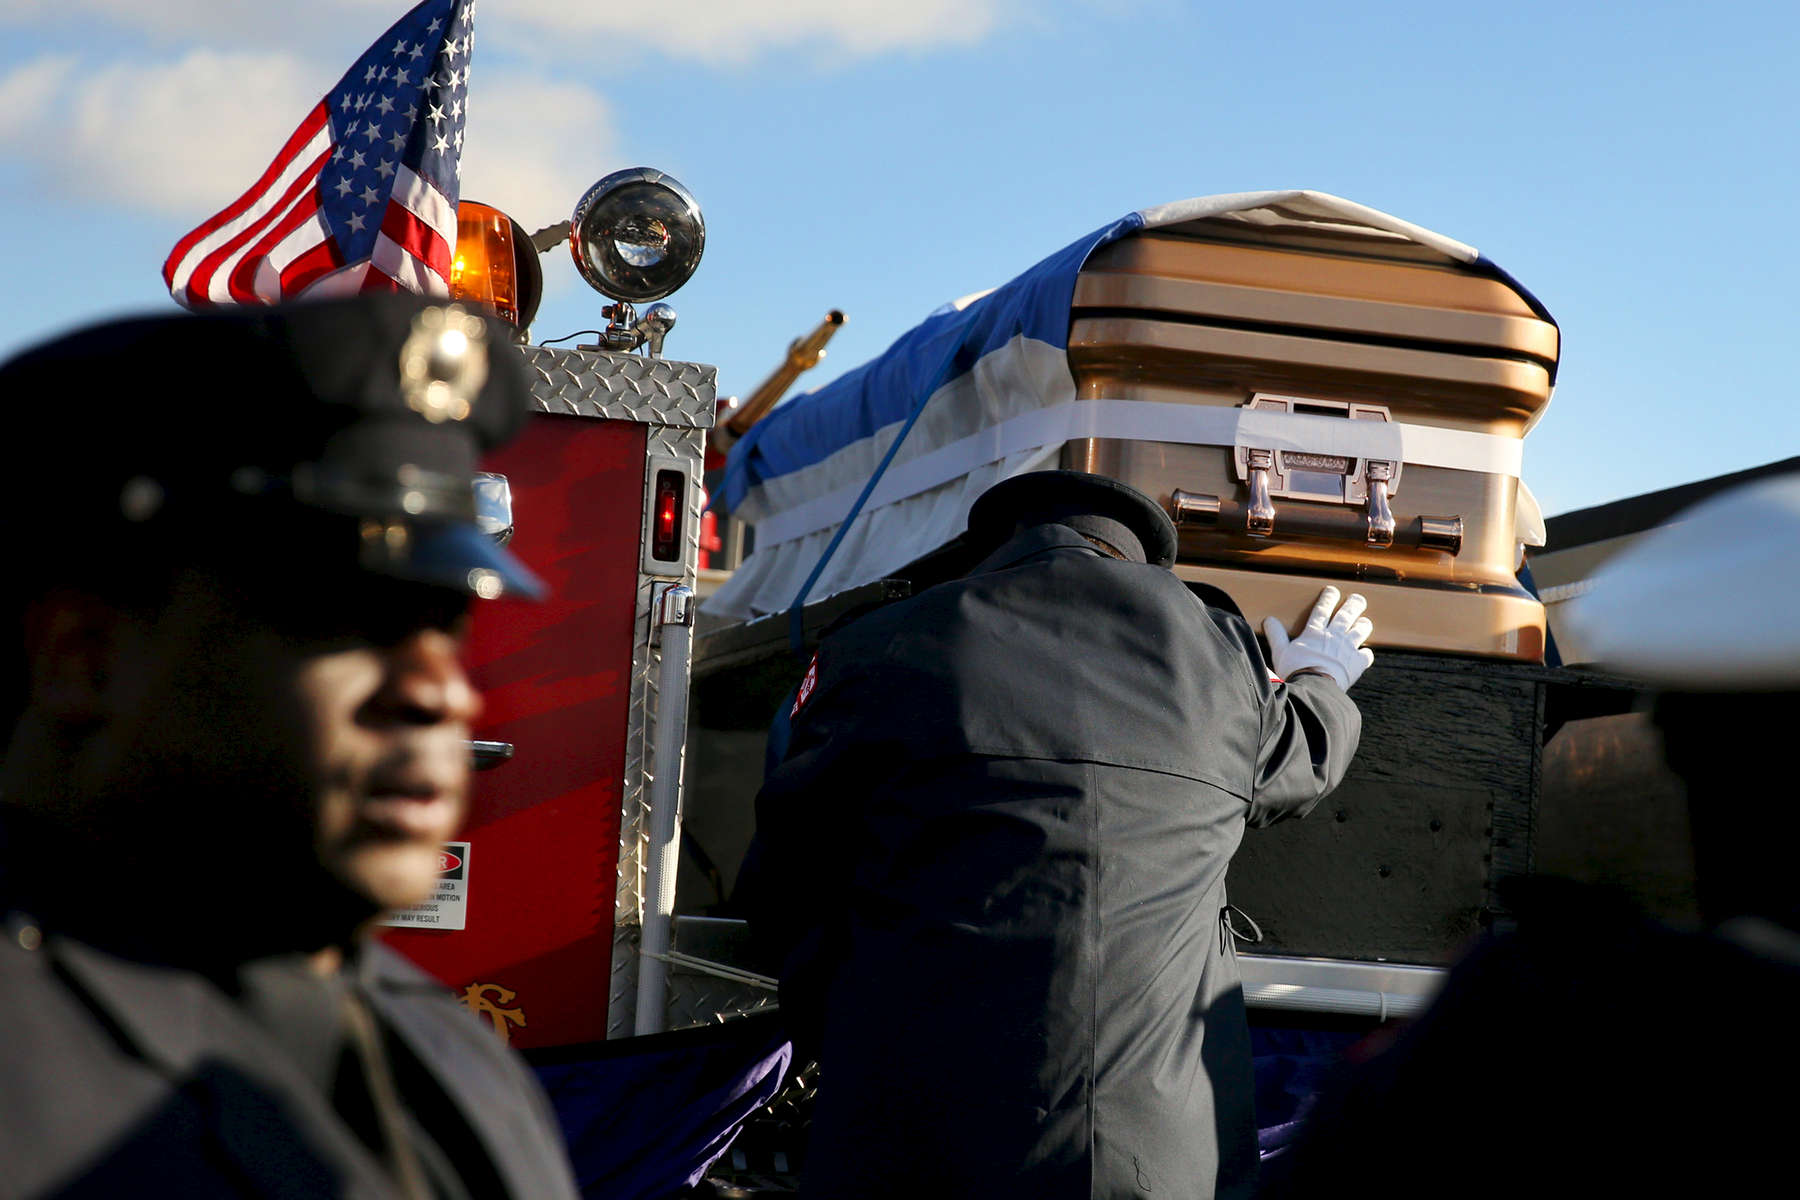 A firefighter touched the coffin of fallen firefighter Daniel Capuano as it rest on the back of an engine following funeral services at St. Rita High School in Chicago. Capuano, a 15-year veteran, was searching the second floor of a fire in a vacant warehouse when he fell down an open elevator shaft and died hours later. 